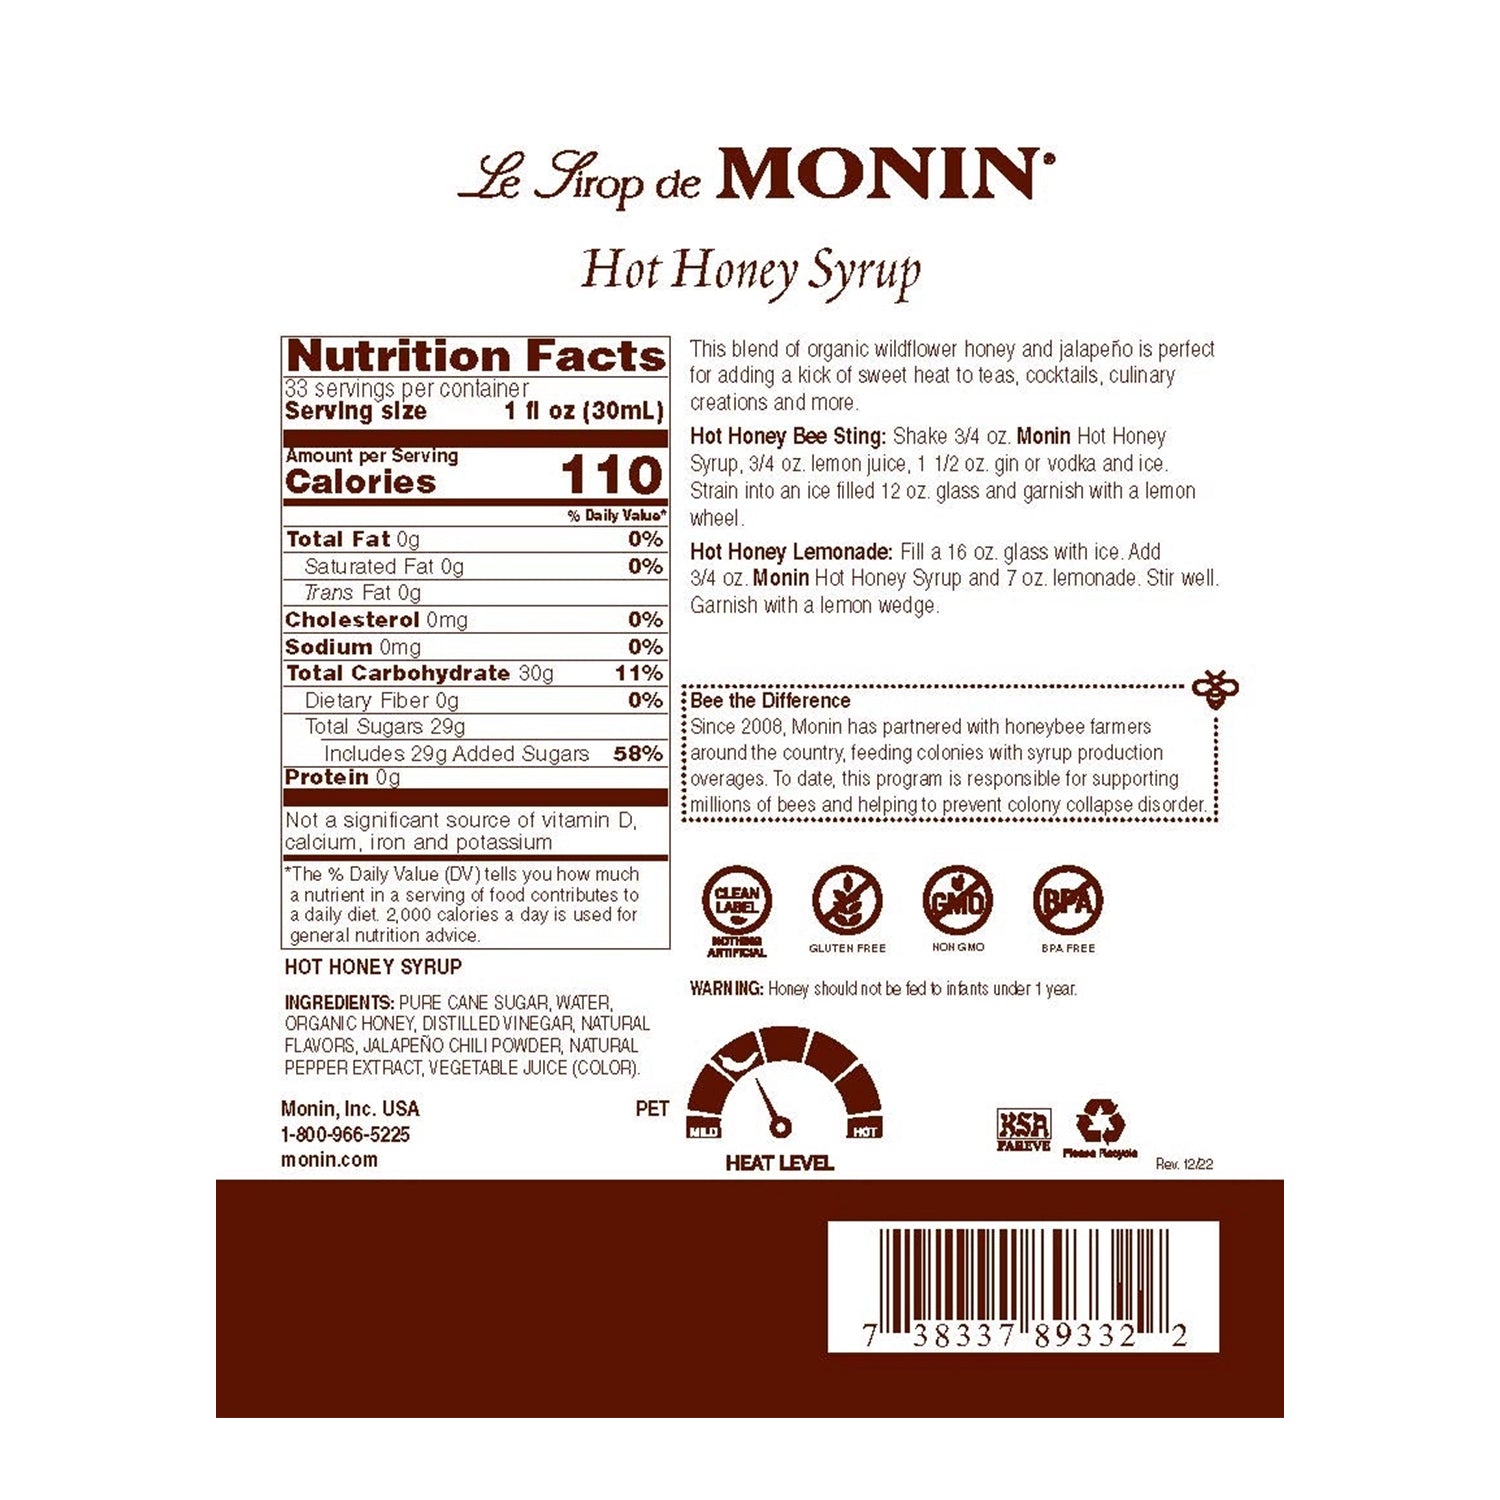 Monin Hot Honey Syrup nutrition facts label